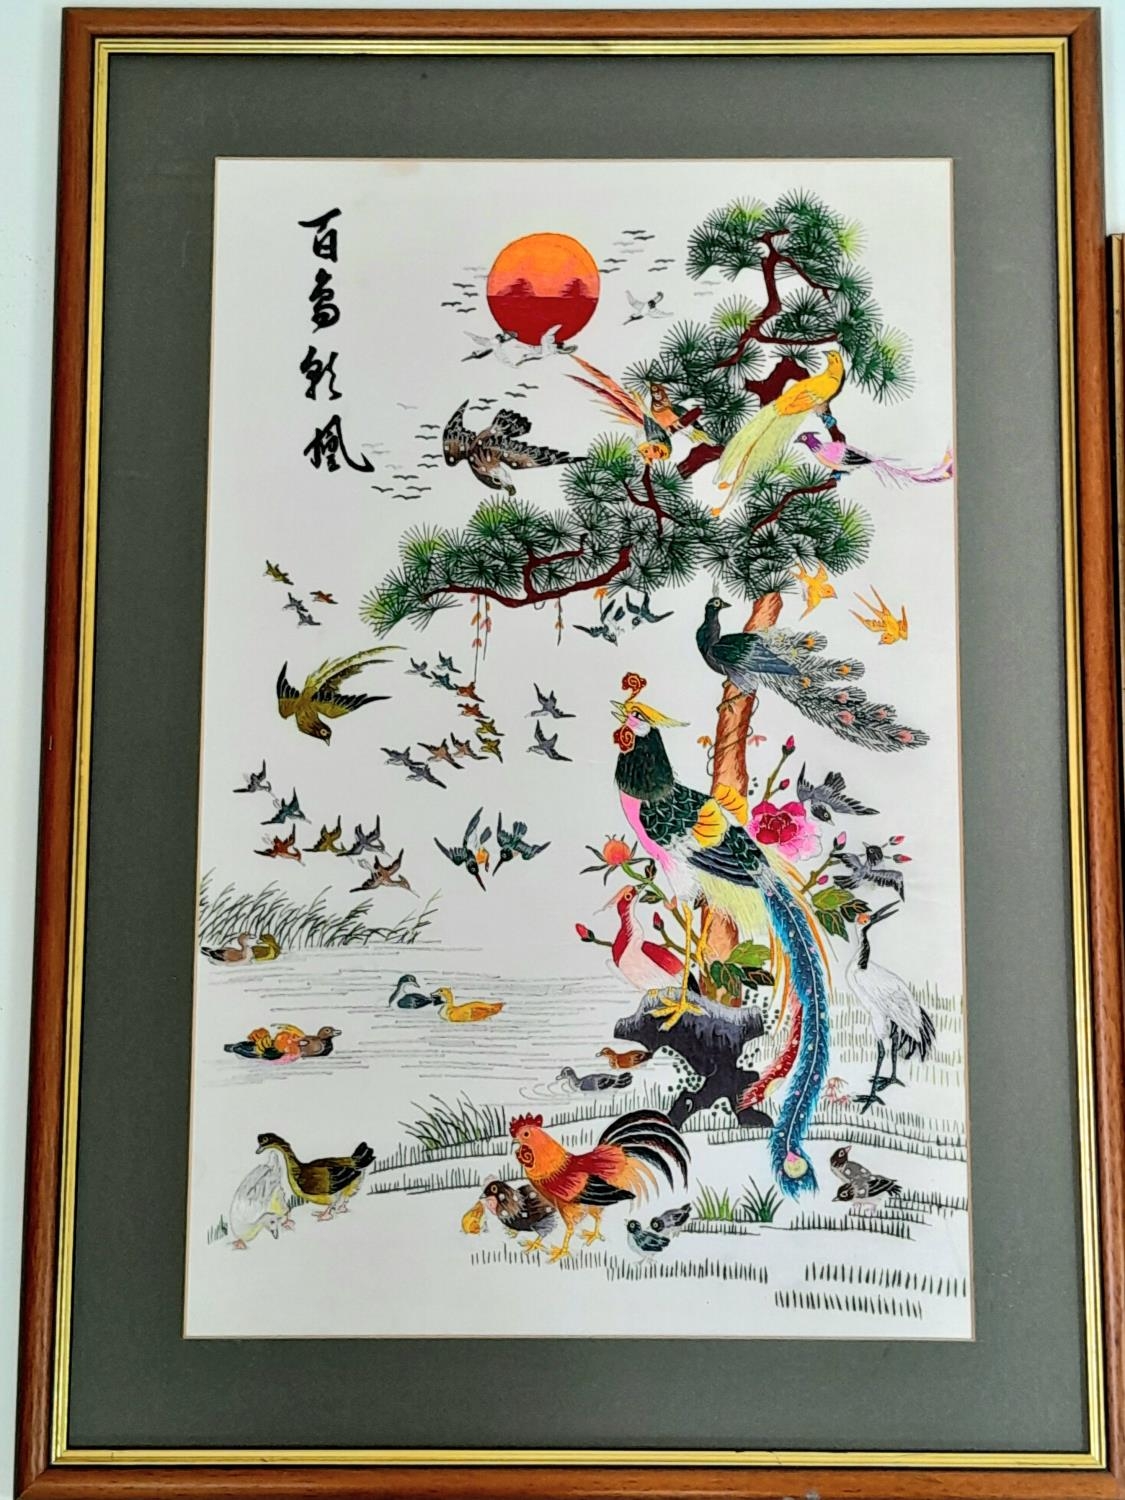 Three Asian Hand-Embroidered Silk Pictures in Frames. Colourful birds and a village scene. 54 x 70cm - Image 3 of 6